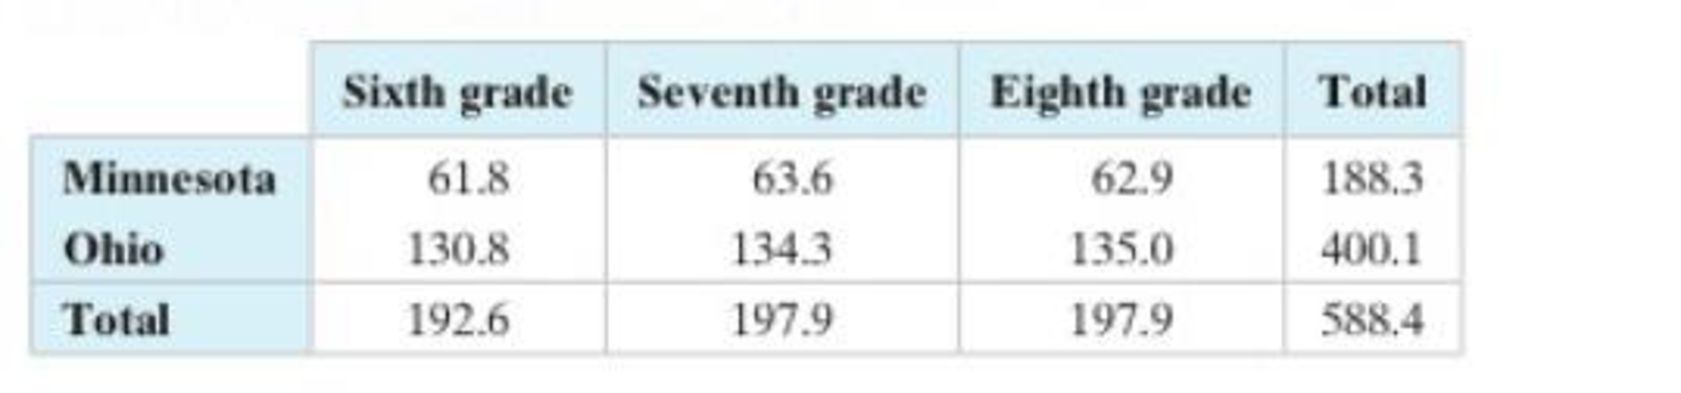 Chapter 3, Problem 5CT, The table shows the sixth, seventh, and eighth grade student enrollment levels (in thousands) in 